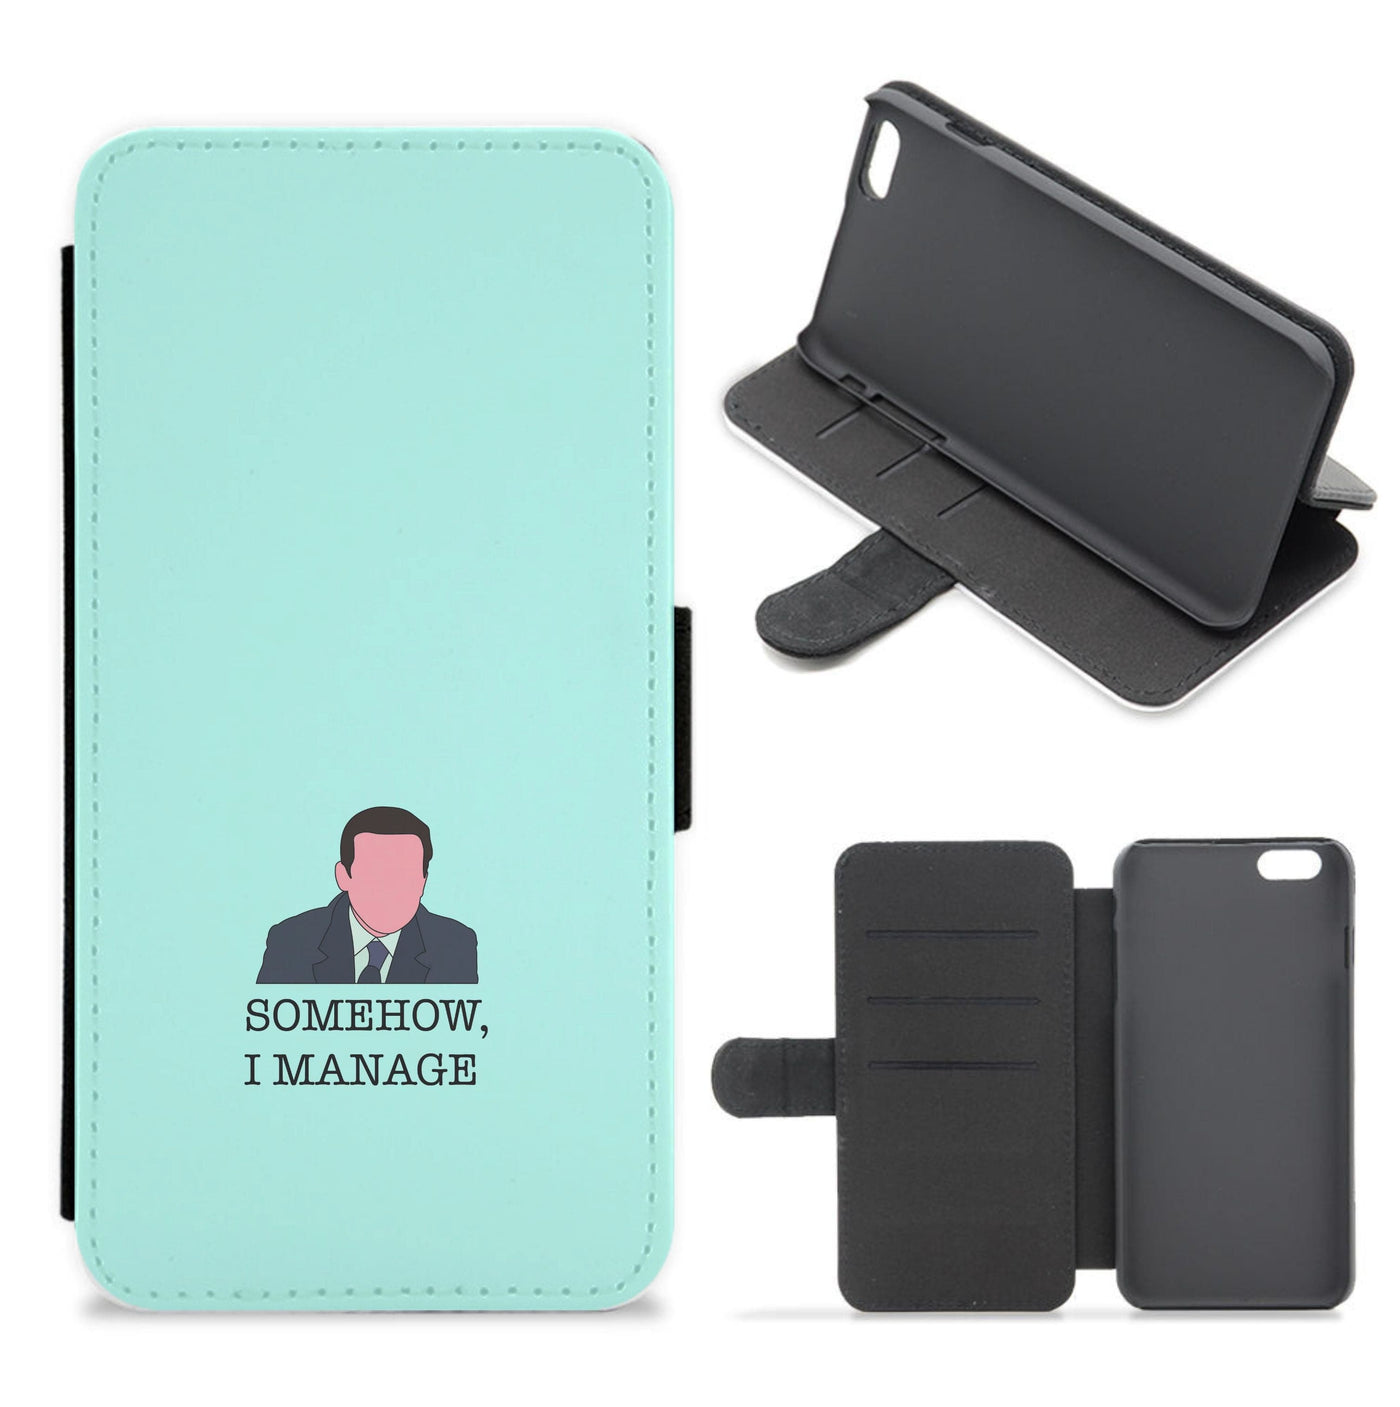 Somehow, I Manage - The Office Flip / Wallet Phone Case